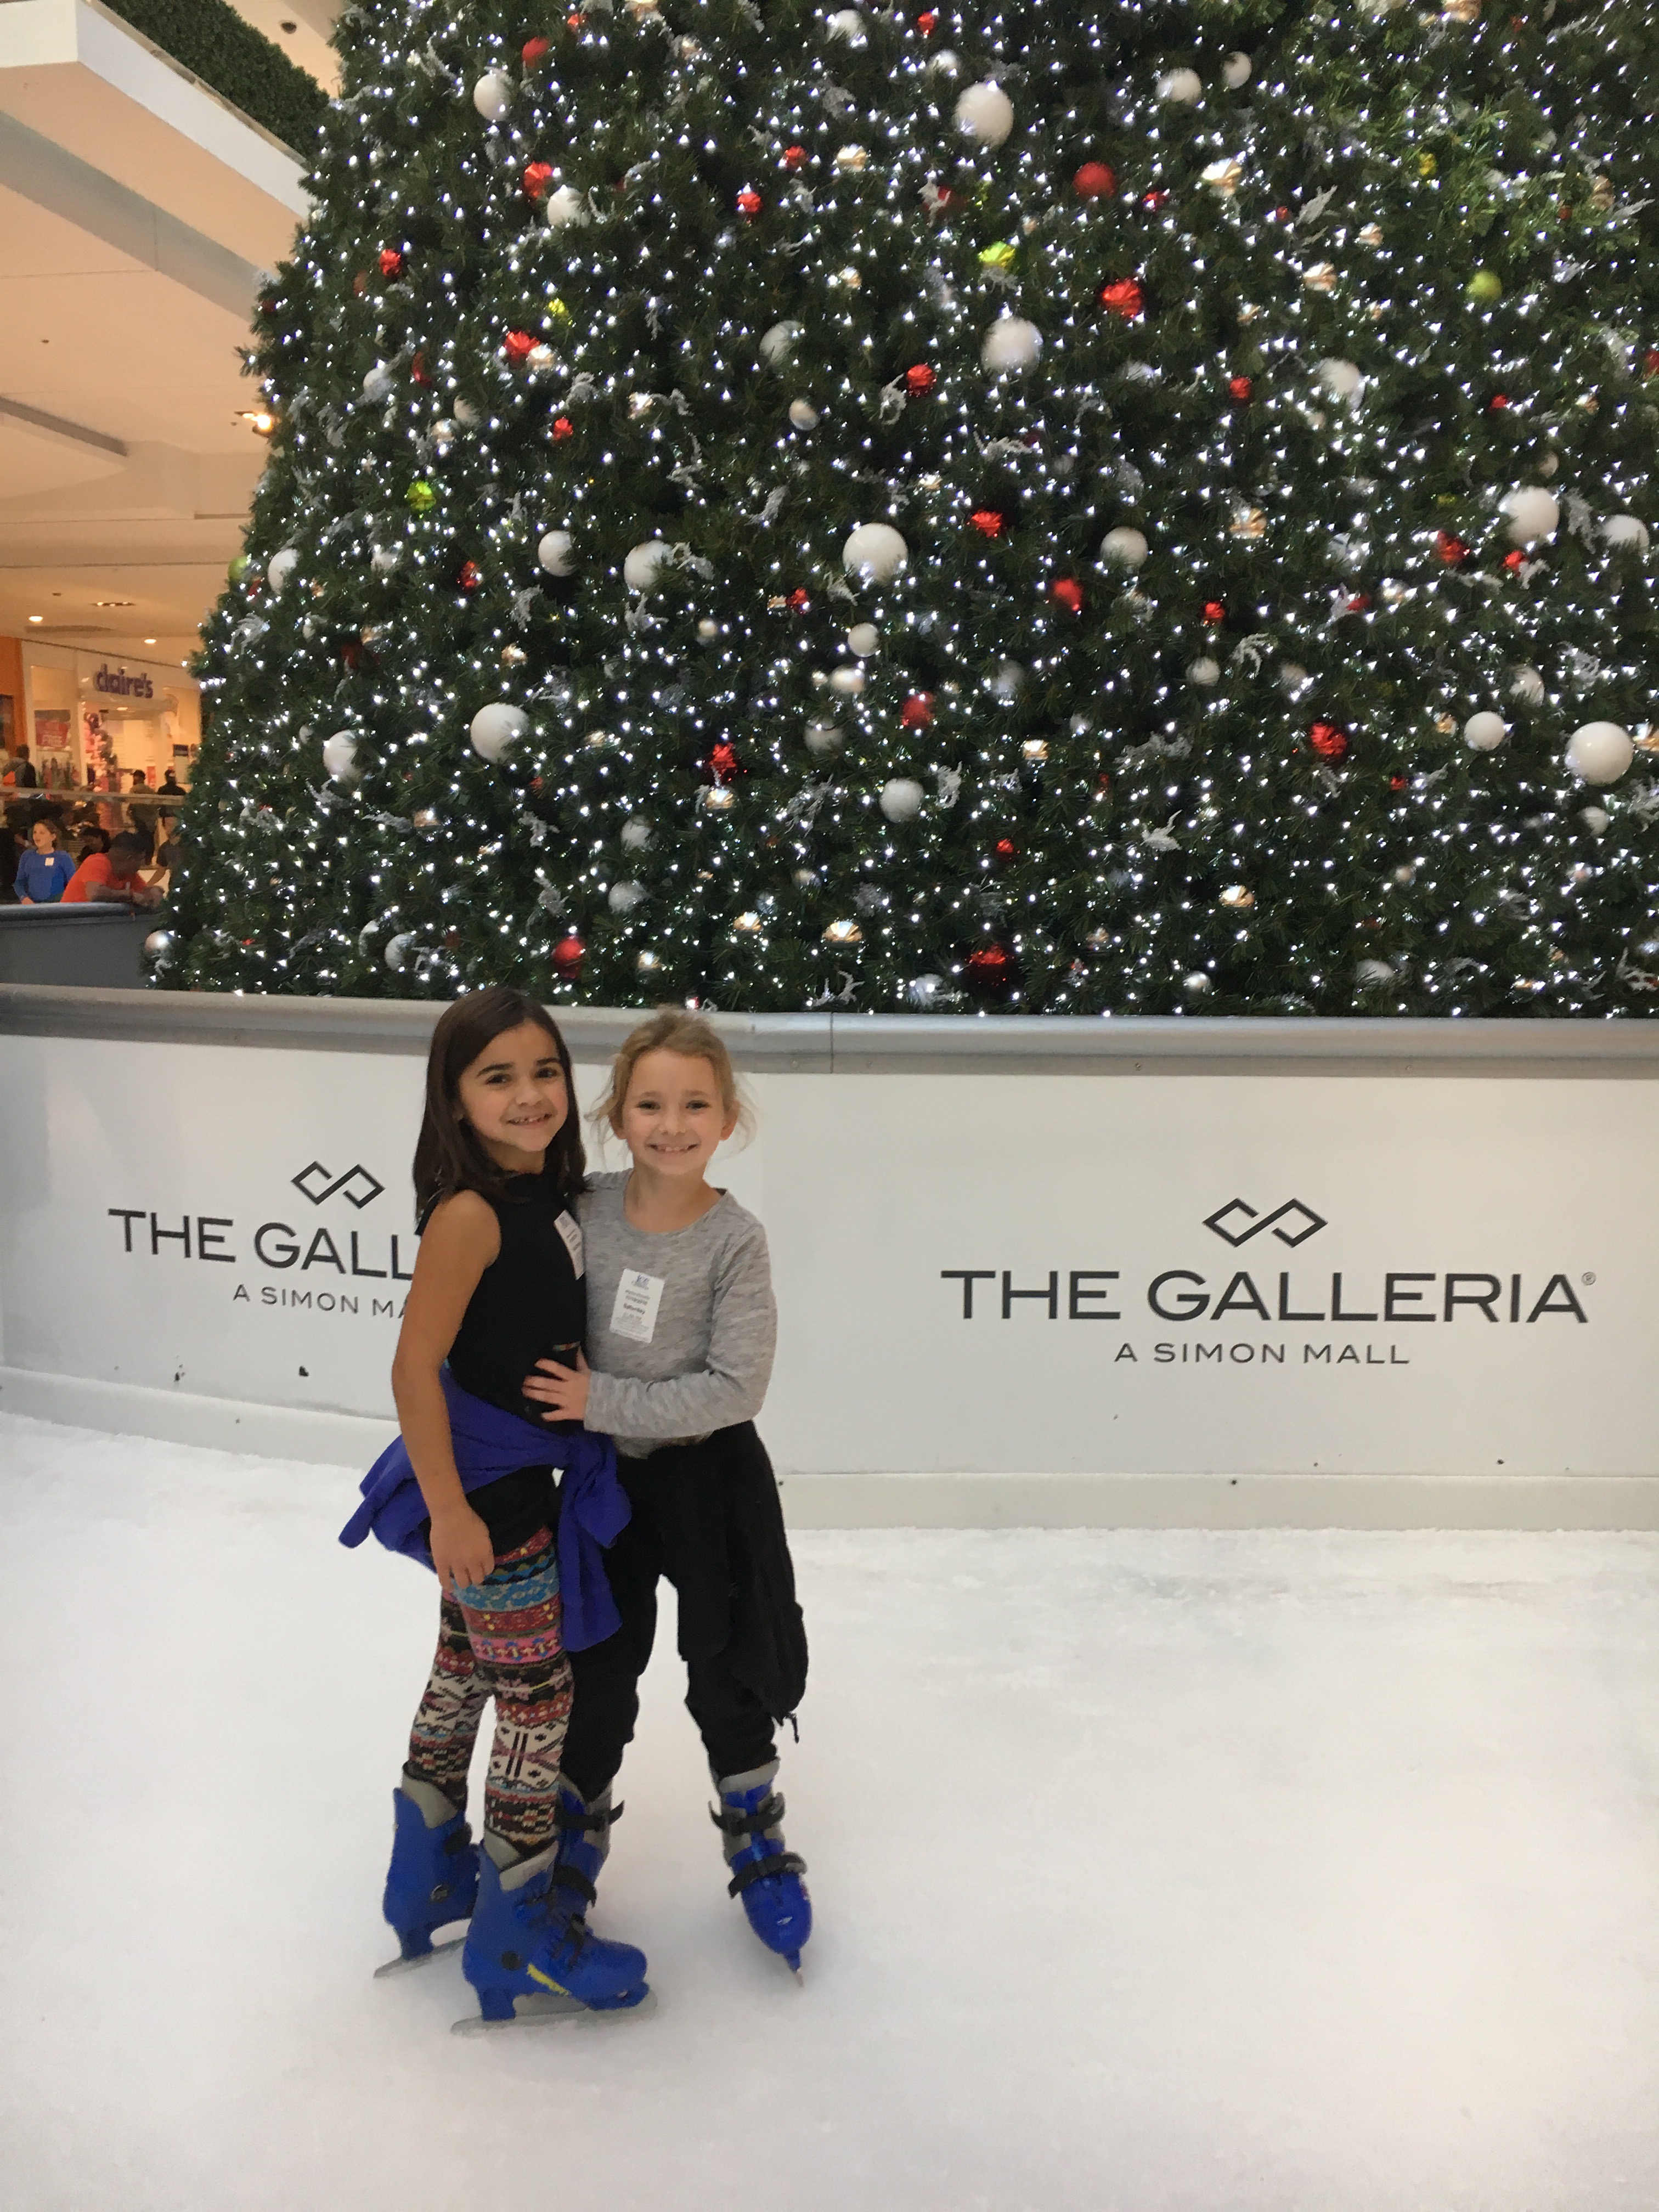 Ice skating at the Galleria Mall!